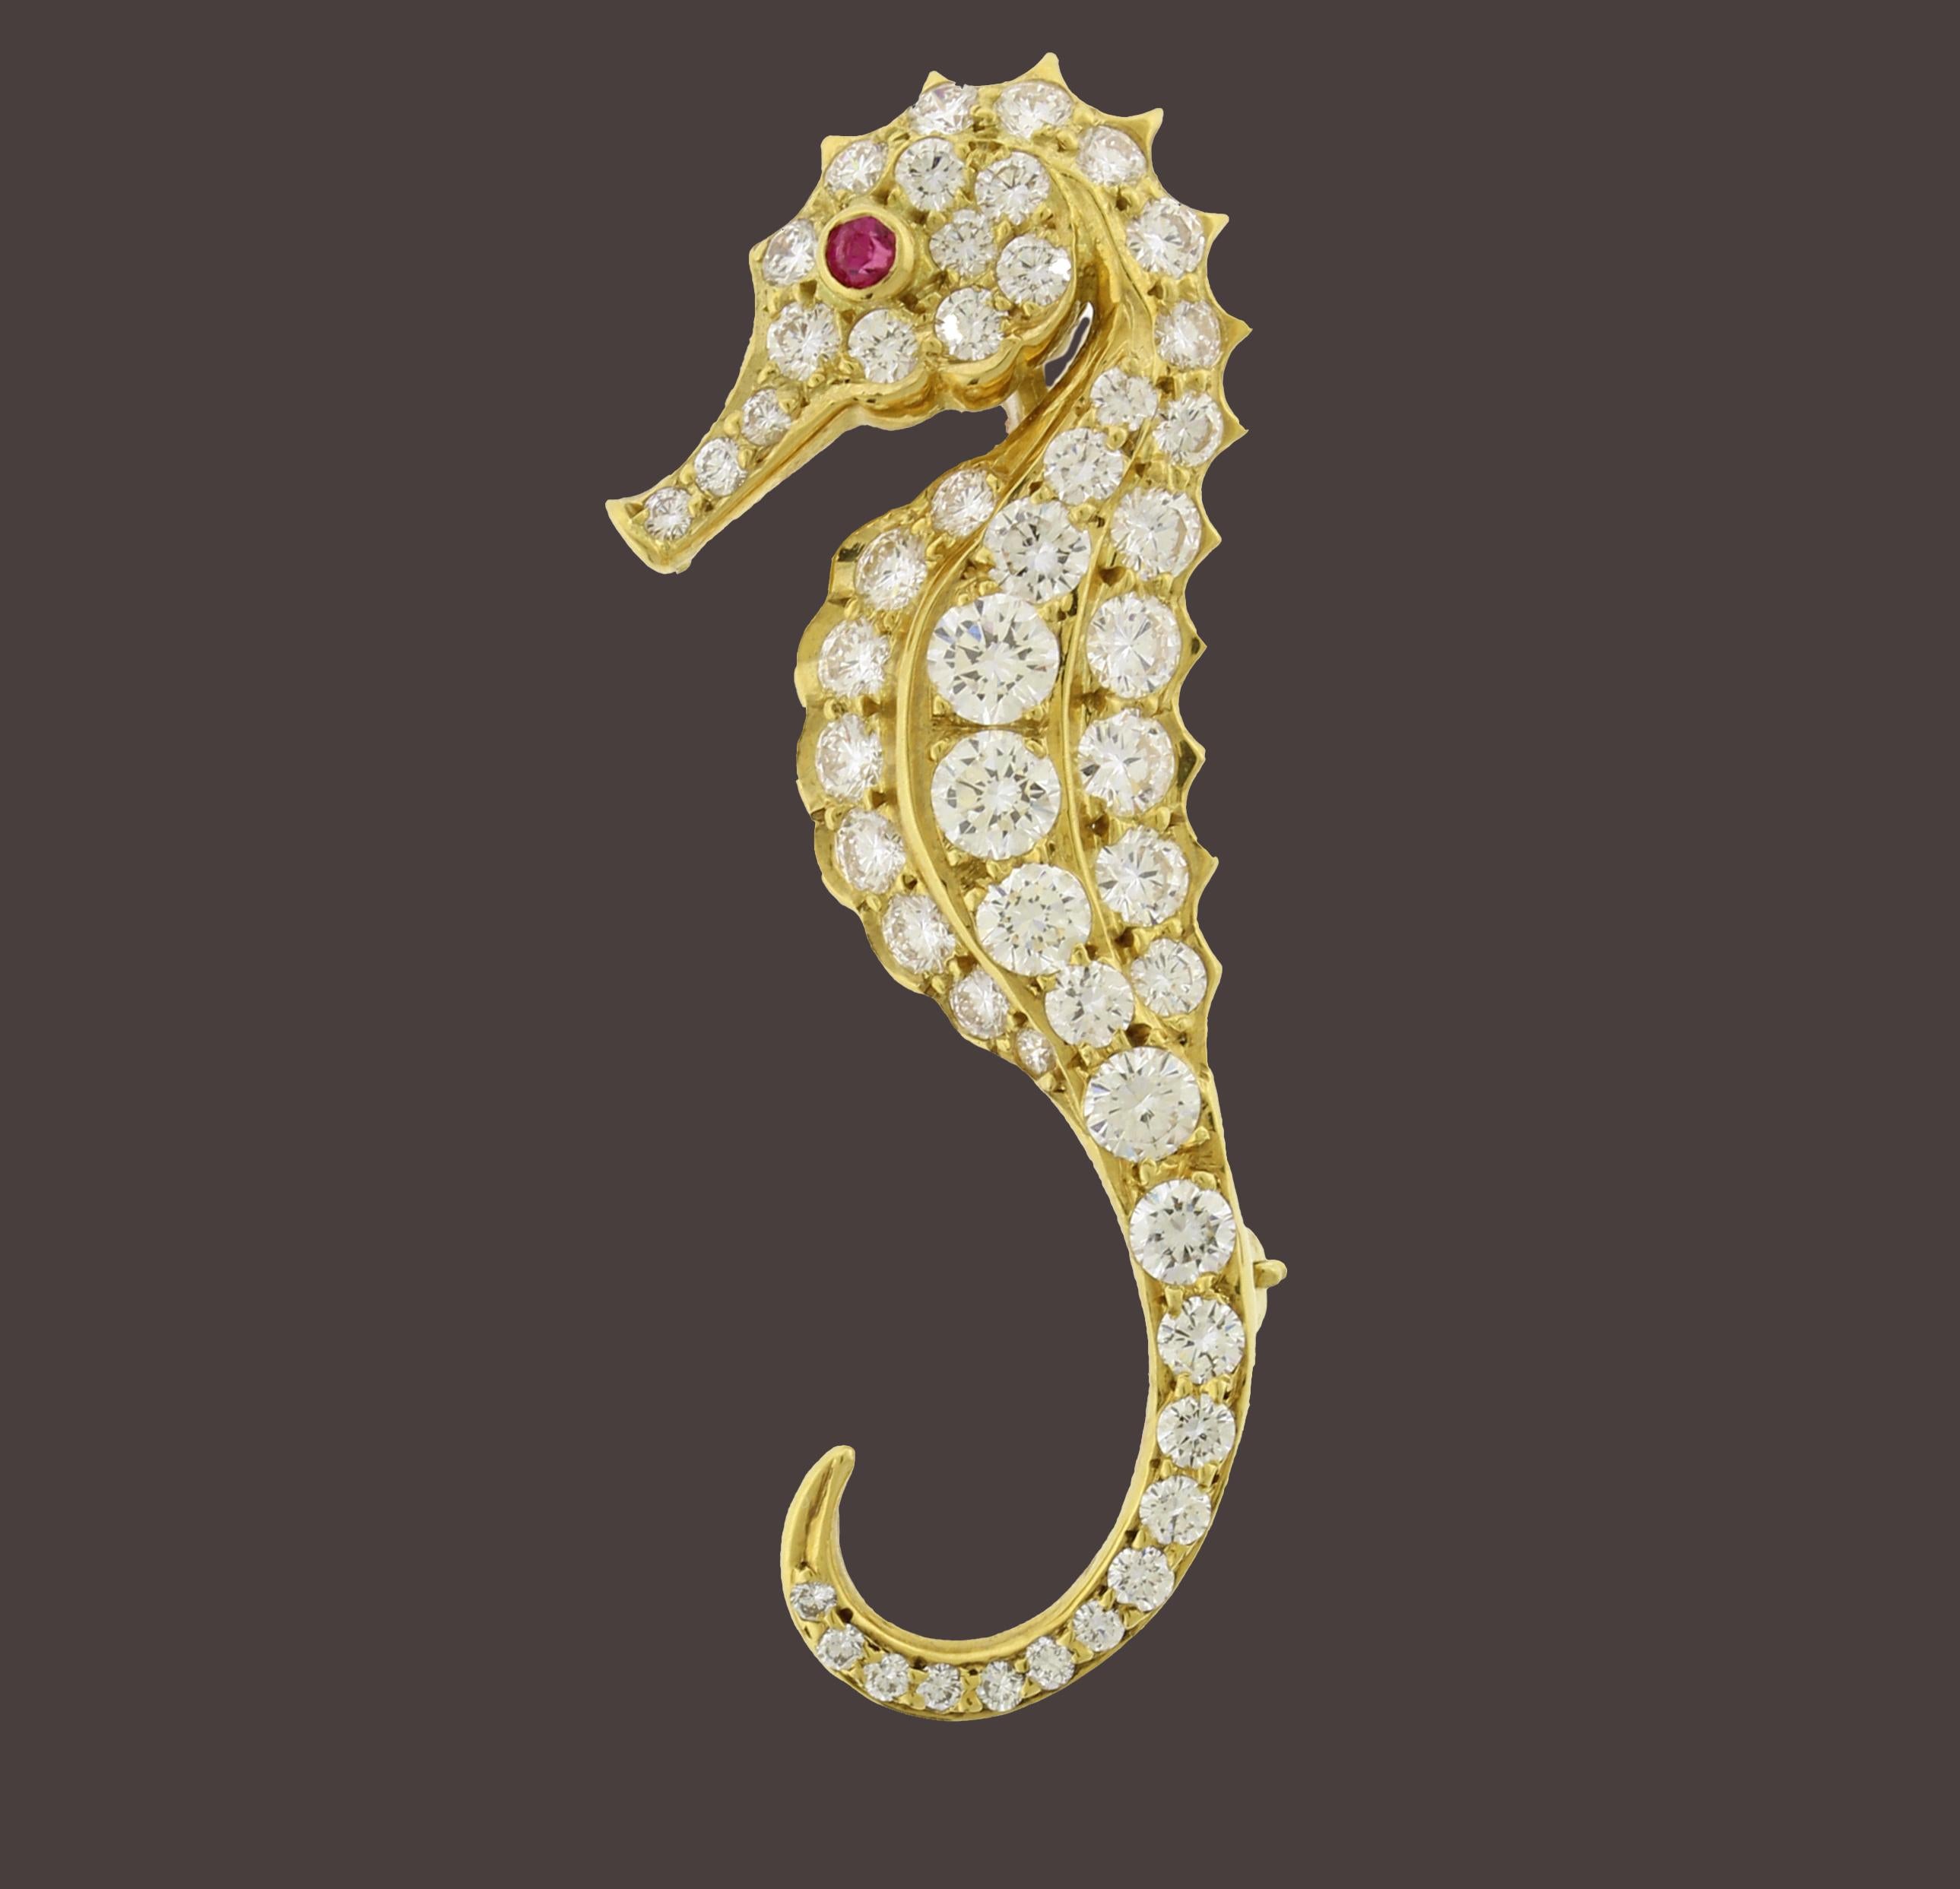 Women's or Men's Diamond and Ruby Seahorse Brooch by Pampillonia Jewelers For Sale